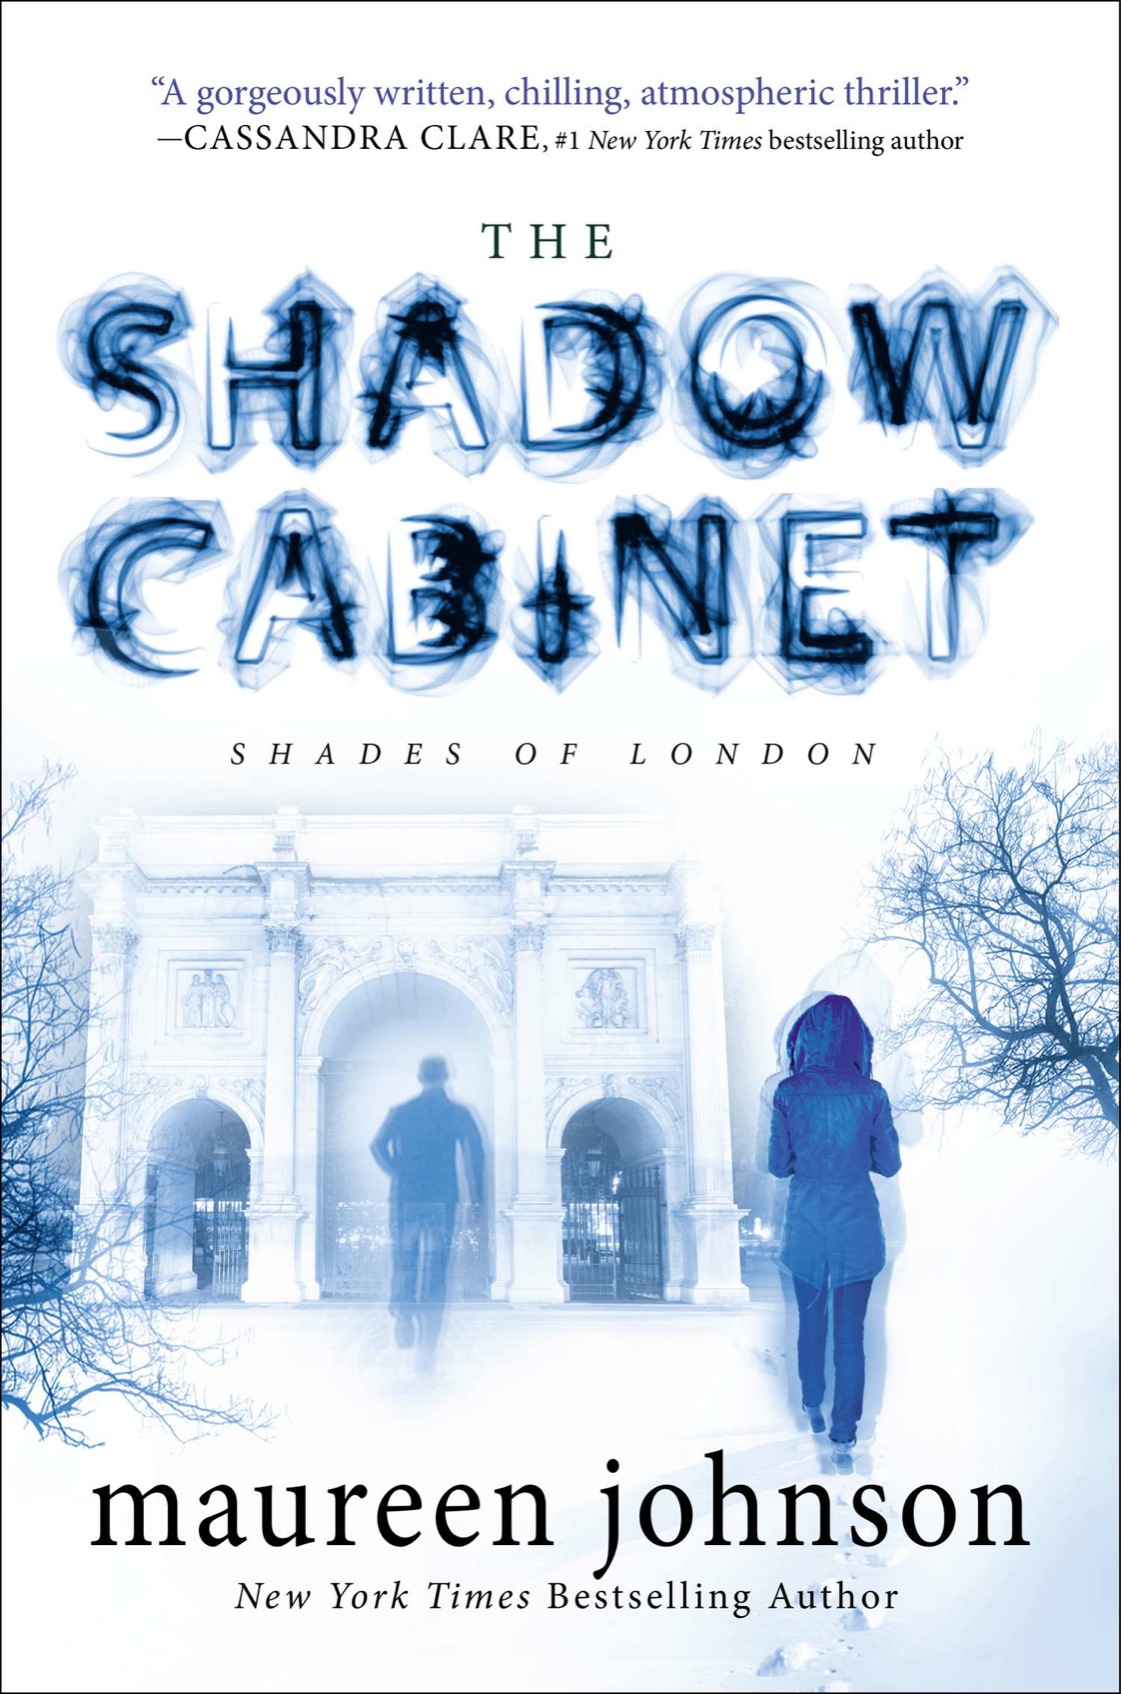 The Shadow Cabinet (2015)